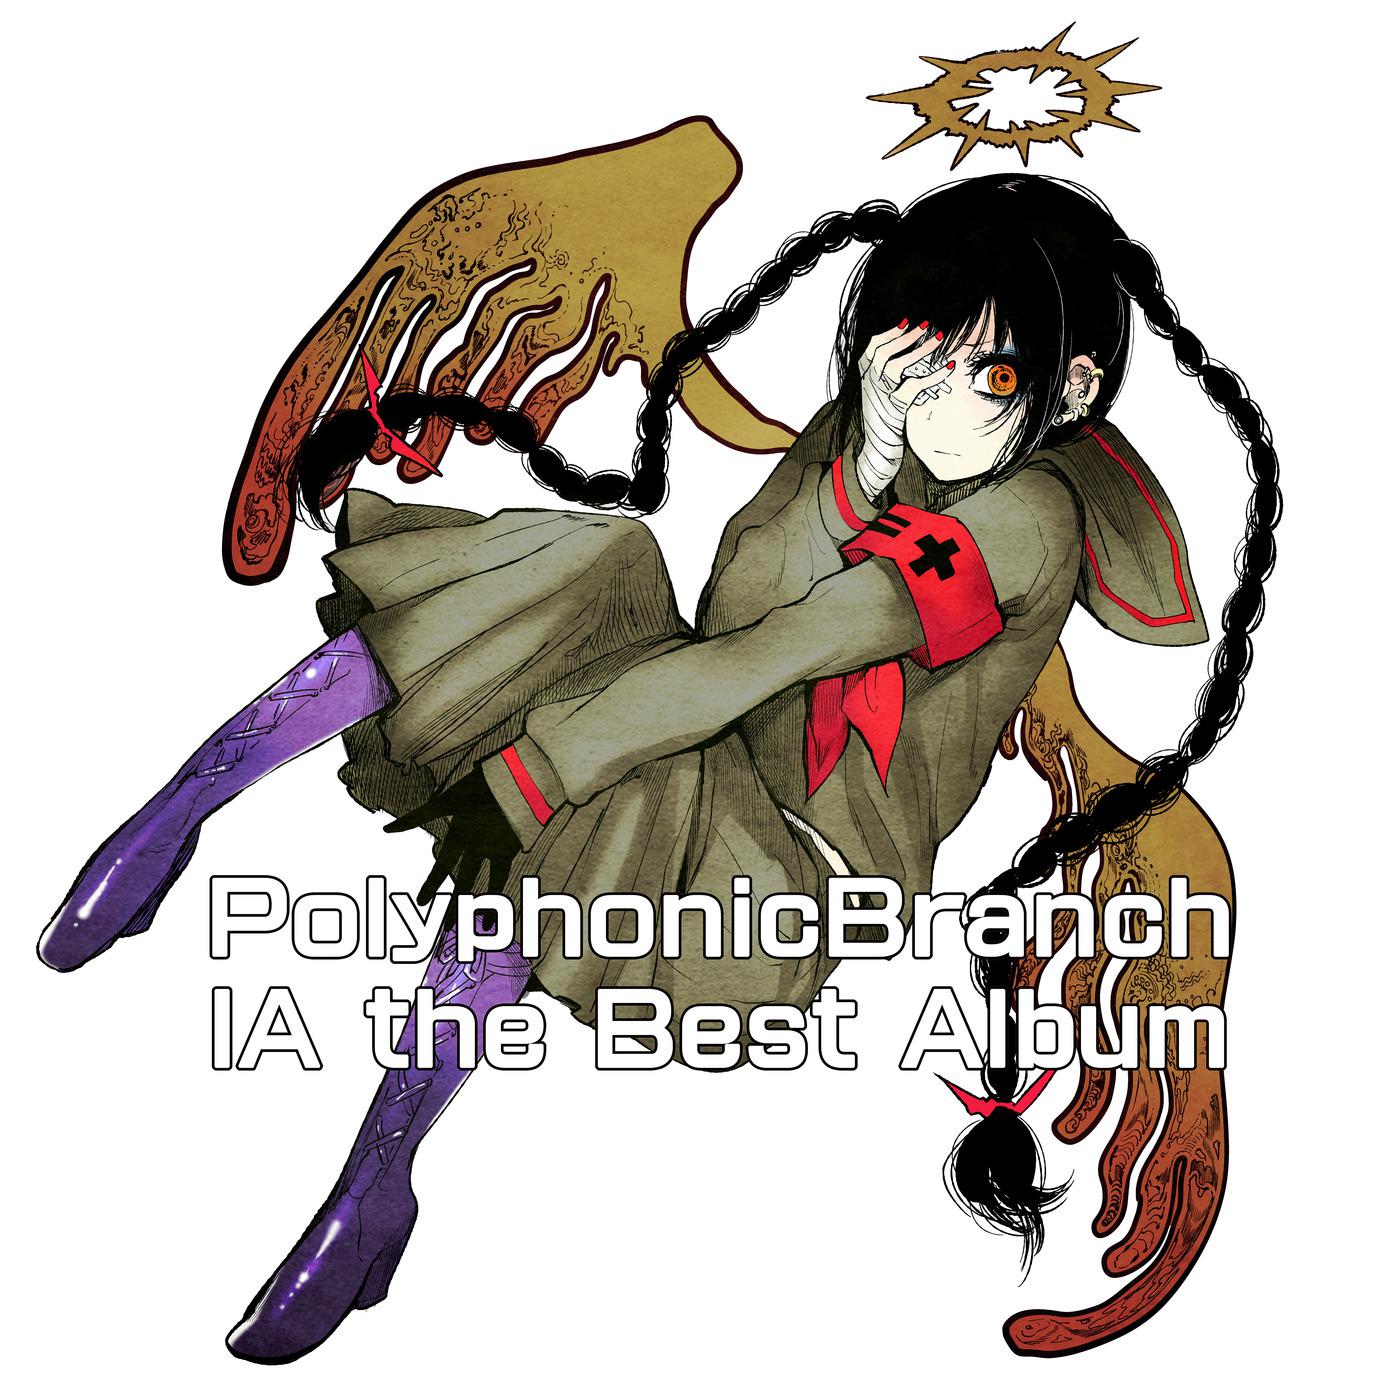 PolyphonicBranch IA the Best!!